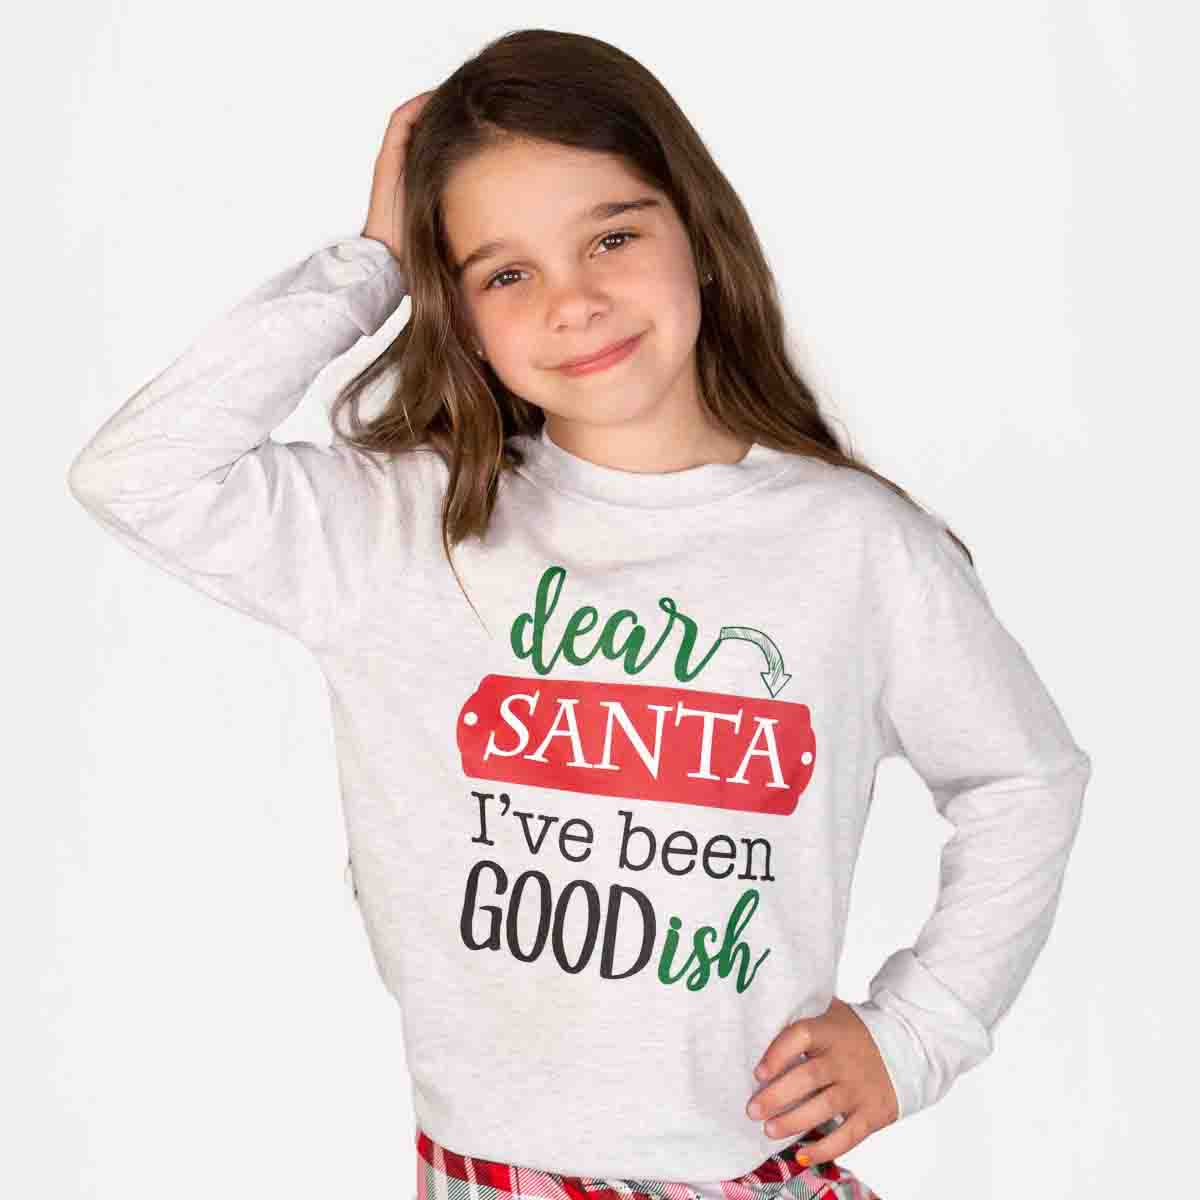 Youth Dear Santa Crew Neck Long Sleeve T-Shirt Heathered White/Green/Red